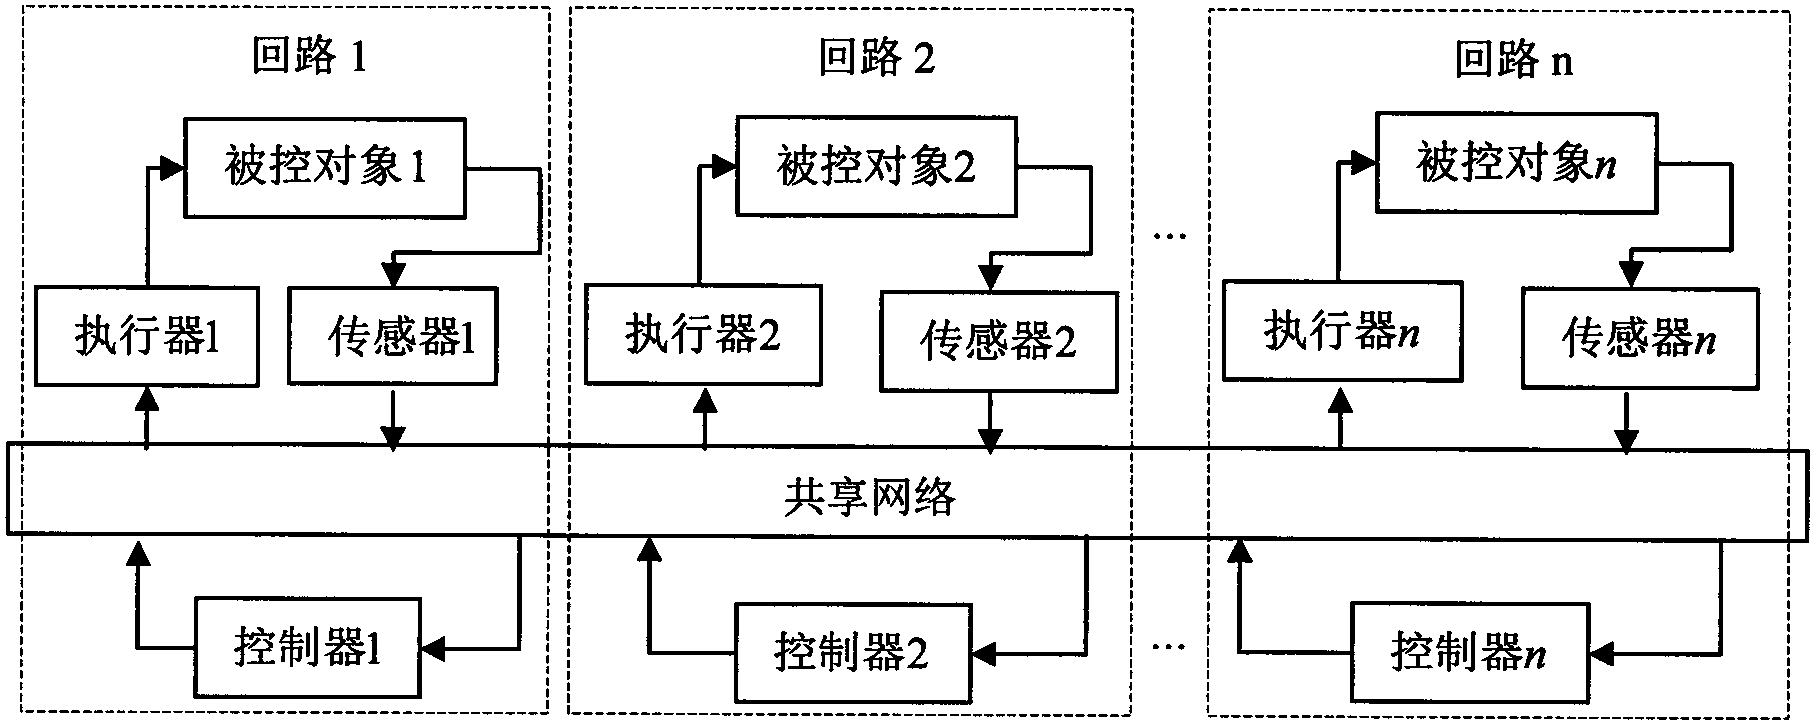 Deadband scheduling method applicable to networked control systems